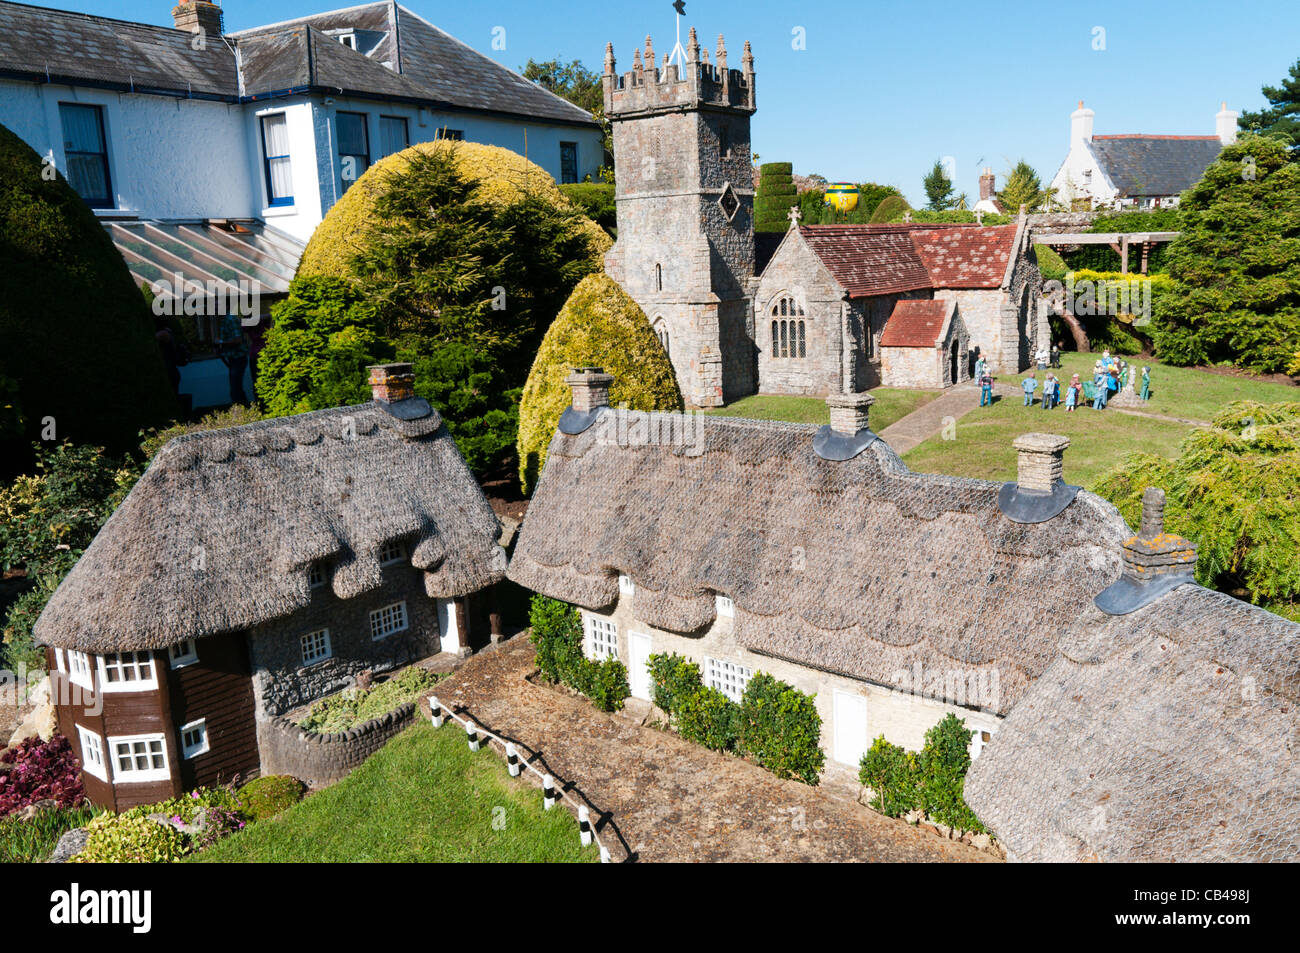 The Model Village at Godshill on the Isle of Wight, England Stock Photo